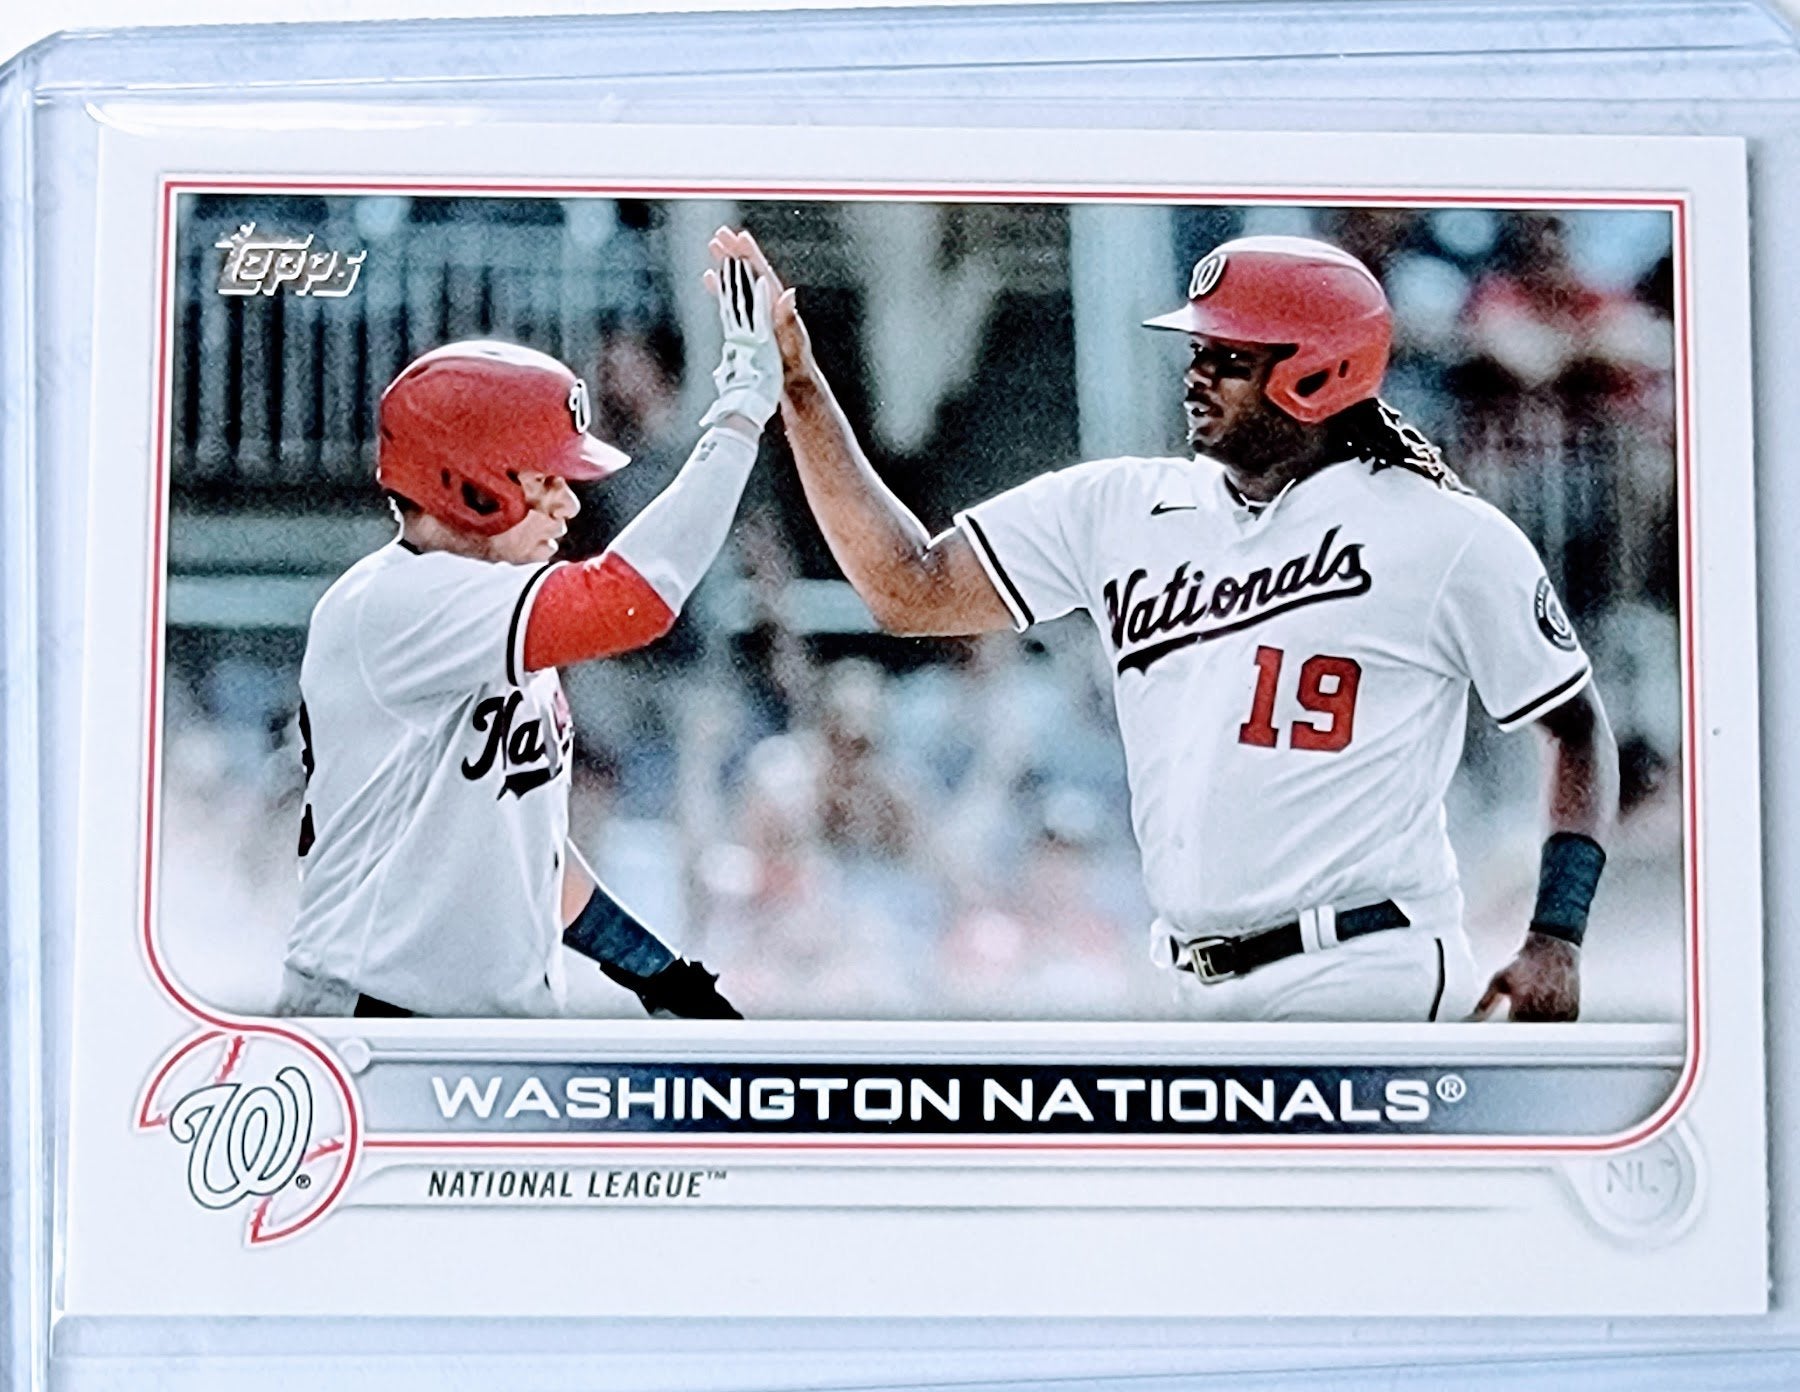 2022 Topps Washington Nationals Team Baseball Trading Card GRB1 simple Xclusive Collectibles   